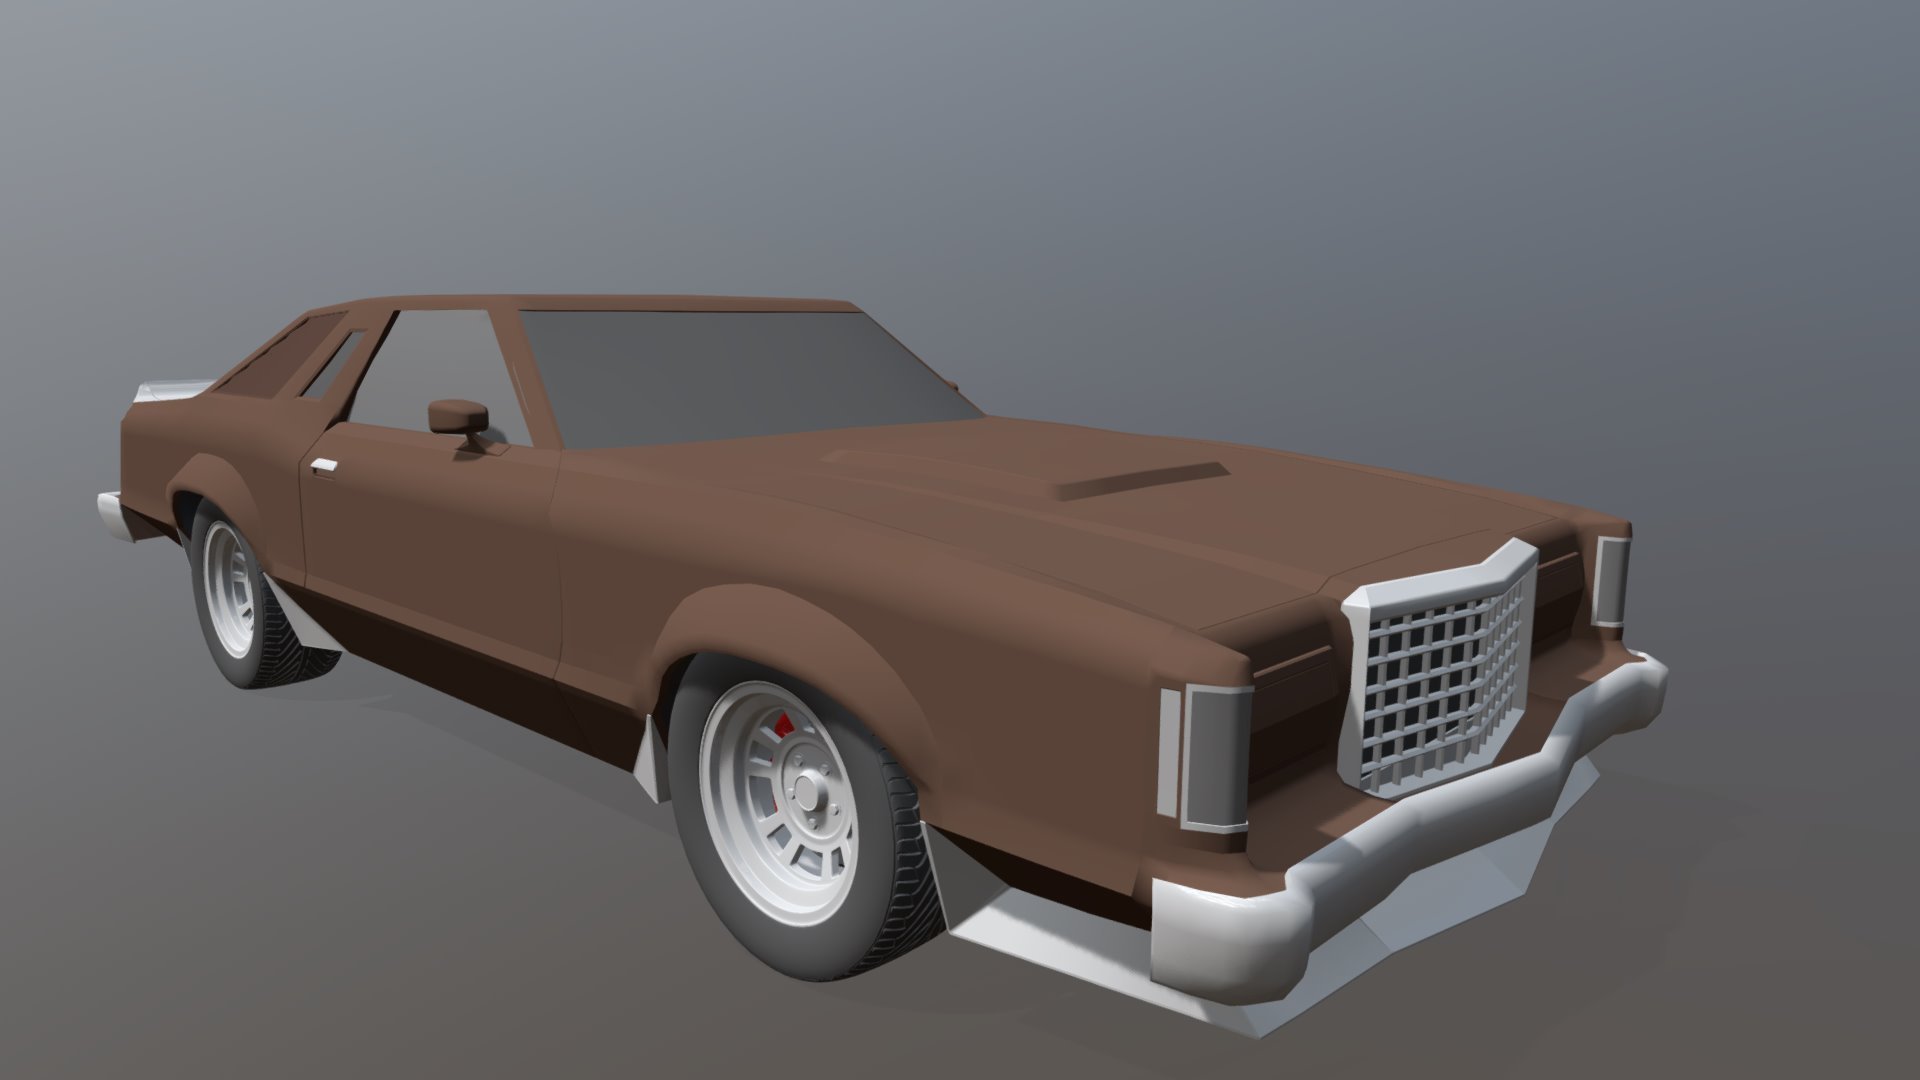 1977 Ford Thunderbird Turbo Coupe. Modeled in Maya and rendered in Blender's EEVEE engine. 
Renders can be seen on my website here 
I also made a turbo engine and full frame for another version of the project 3d model